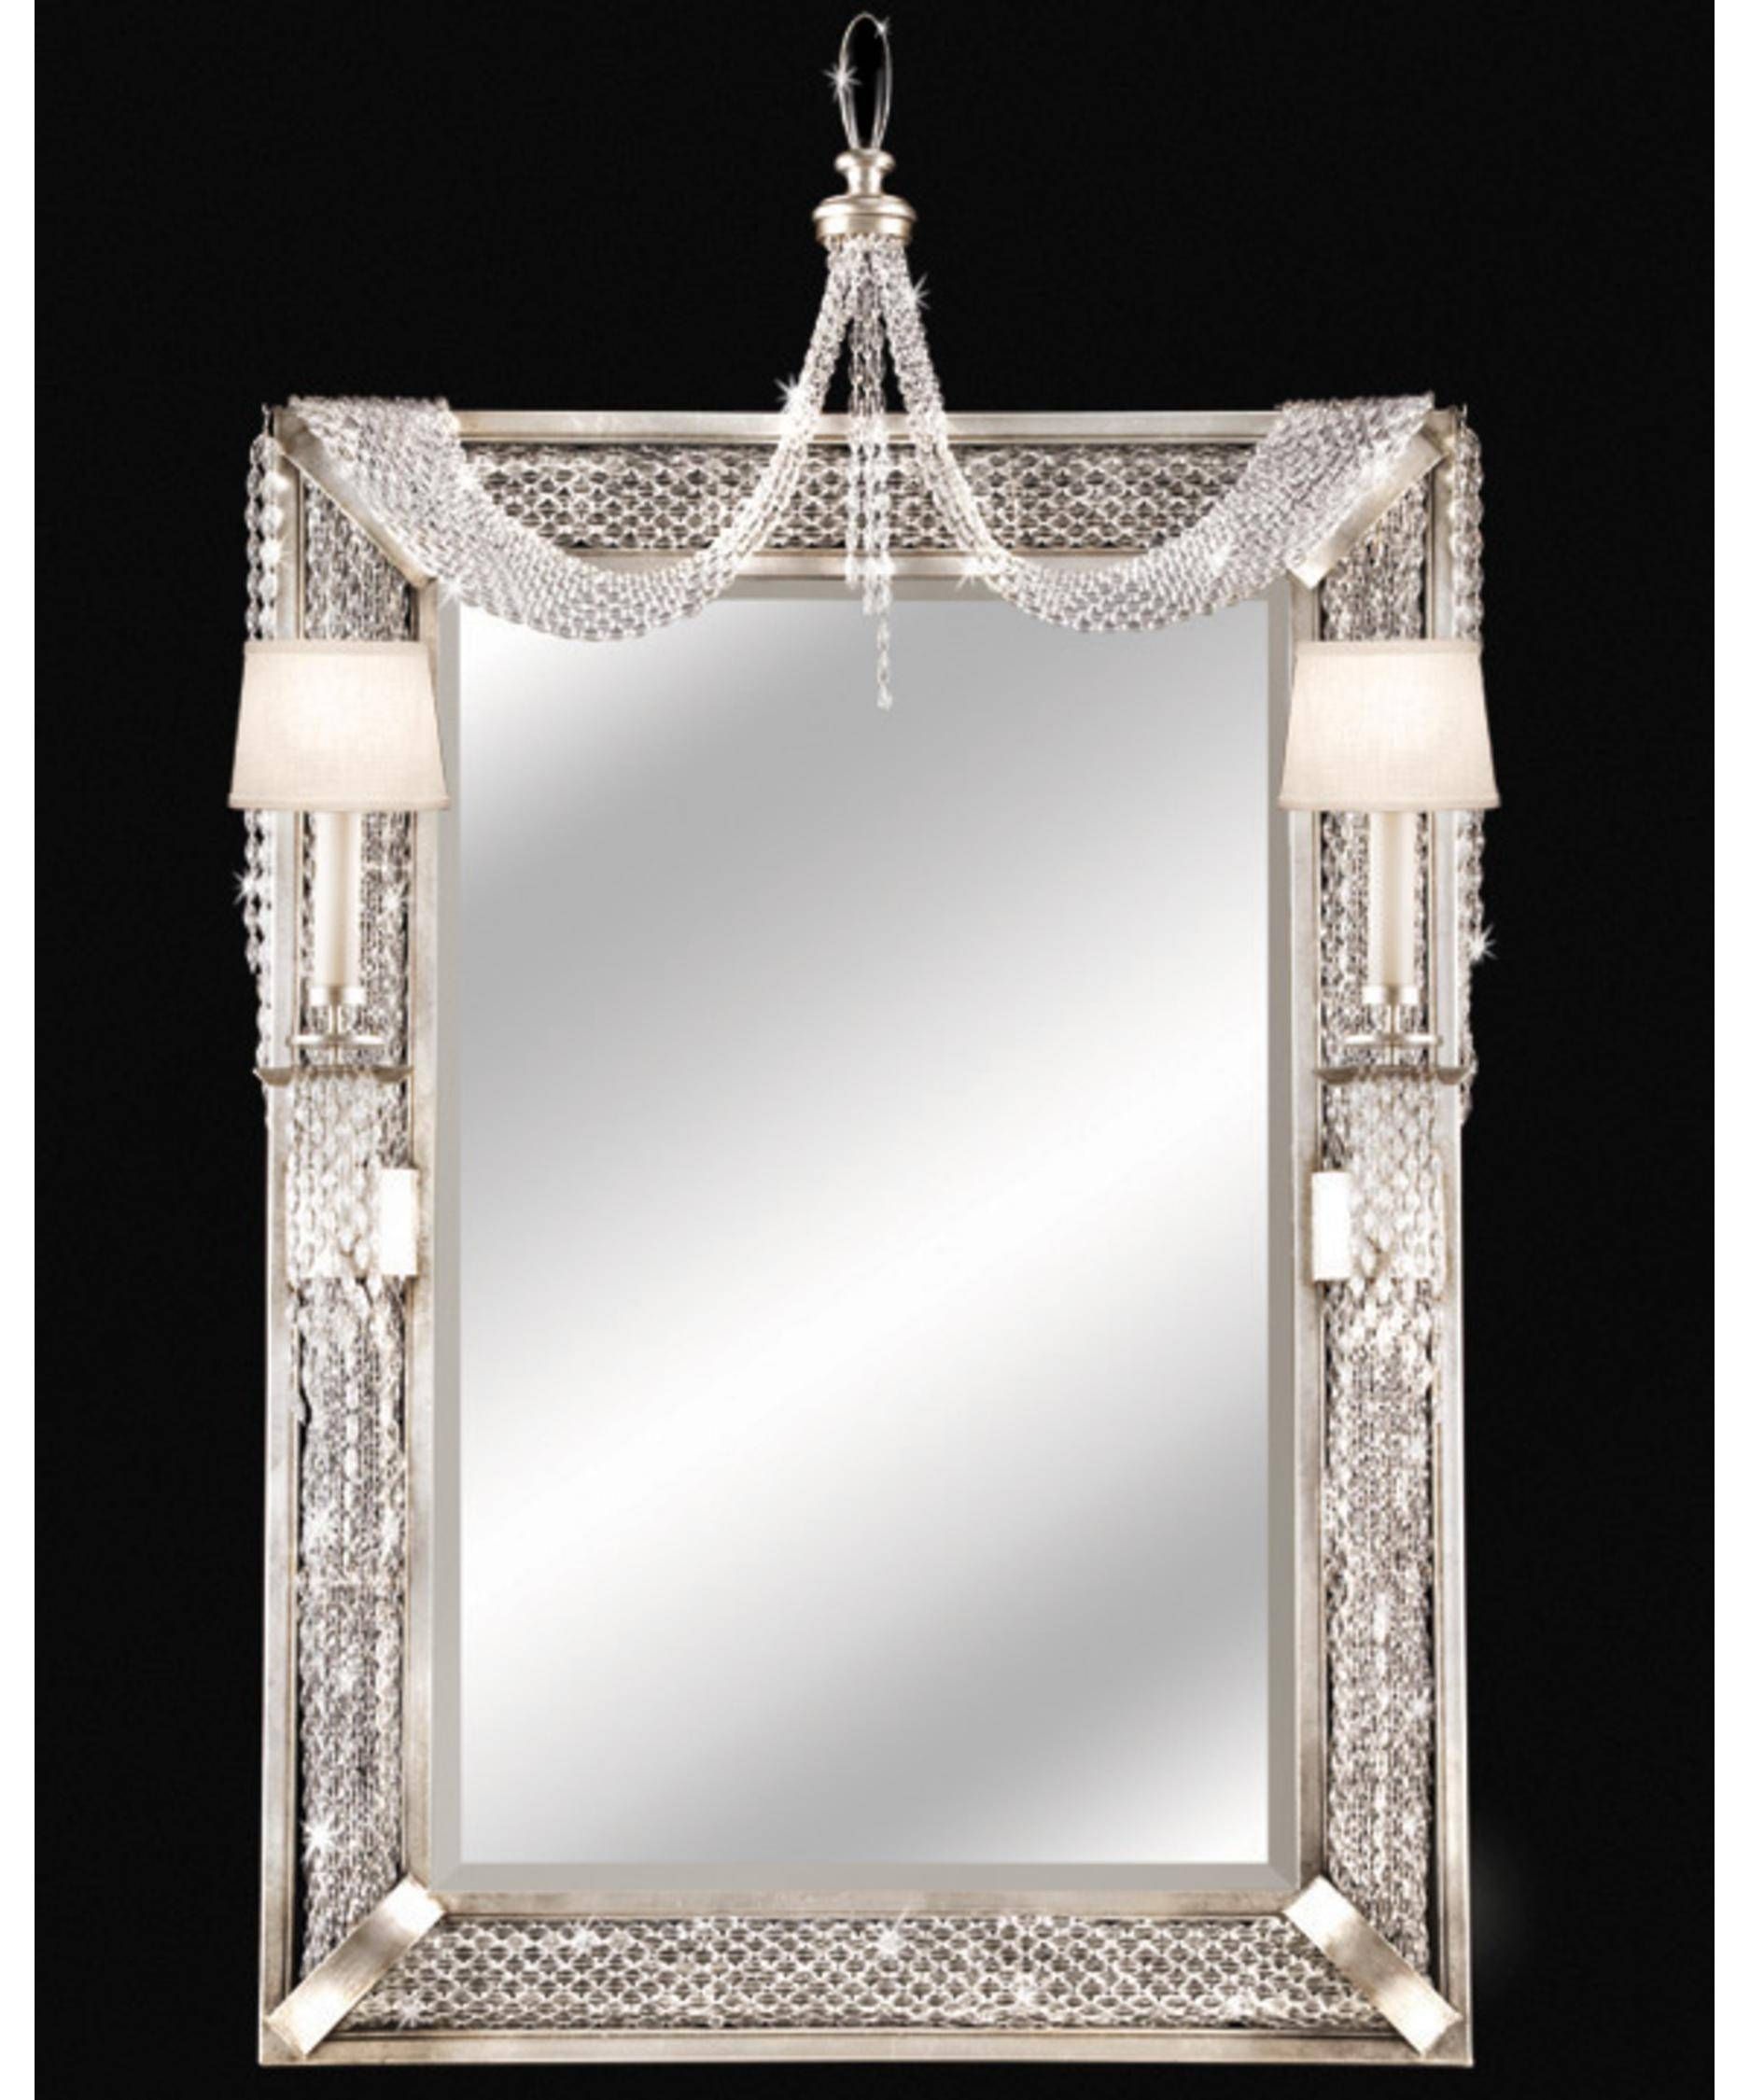 Fine Art Lamps 751255 Cascades 9 Inch Wall Mirror | Capitol Regarding Wall Mirrors With Crystals (View 2 of 25)